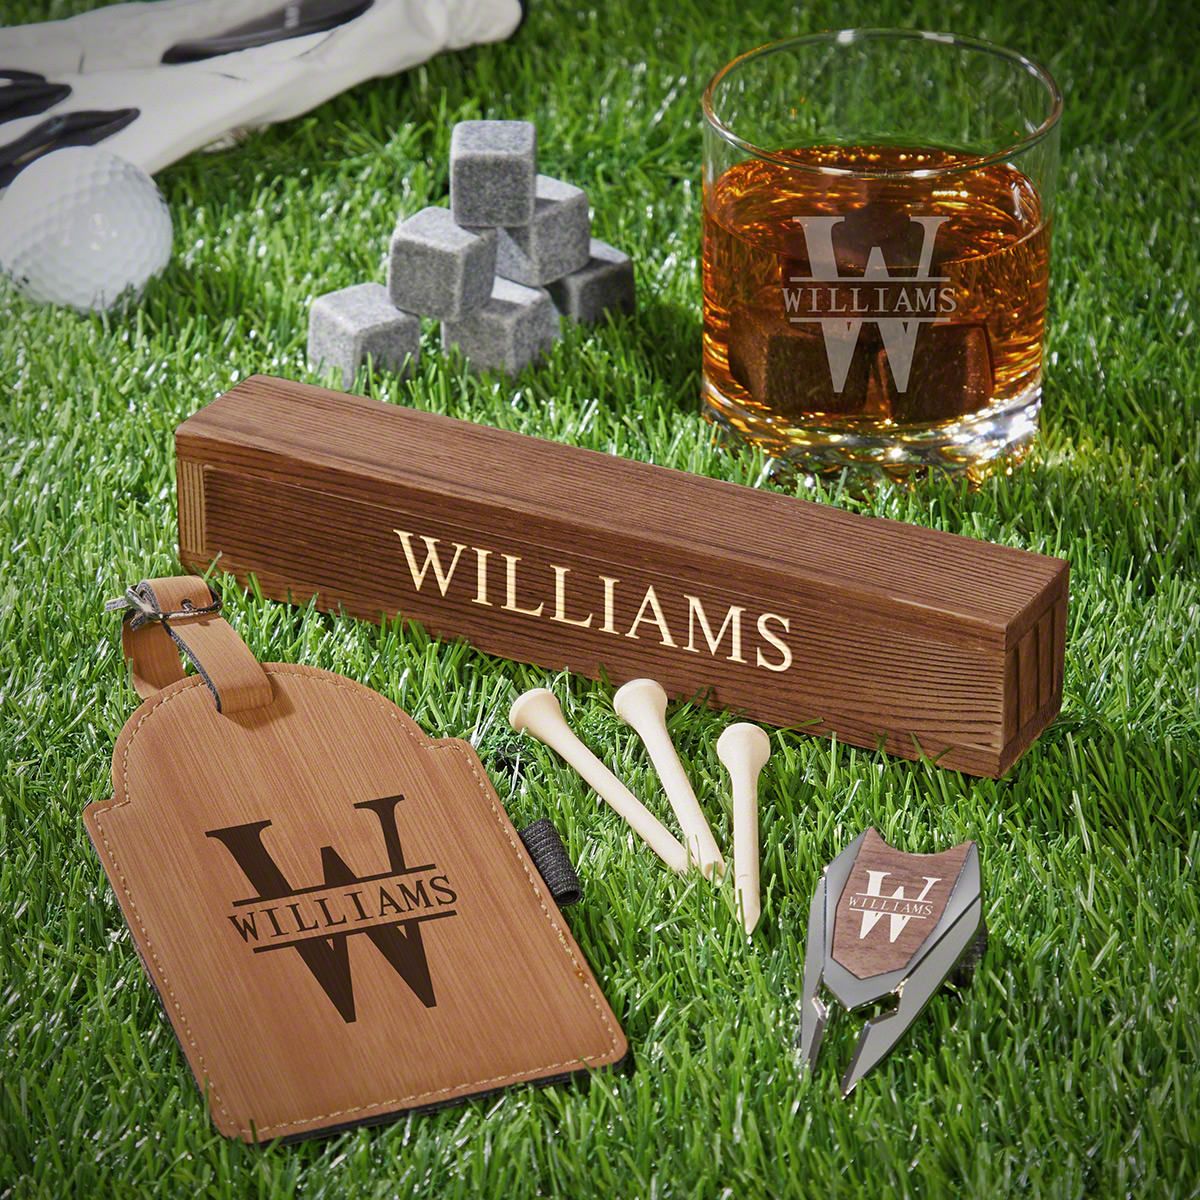 Oakmont Engraved Buckman Whiskey and Golf Gifts